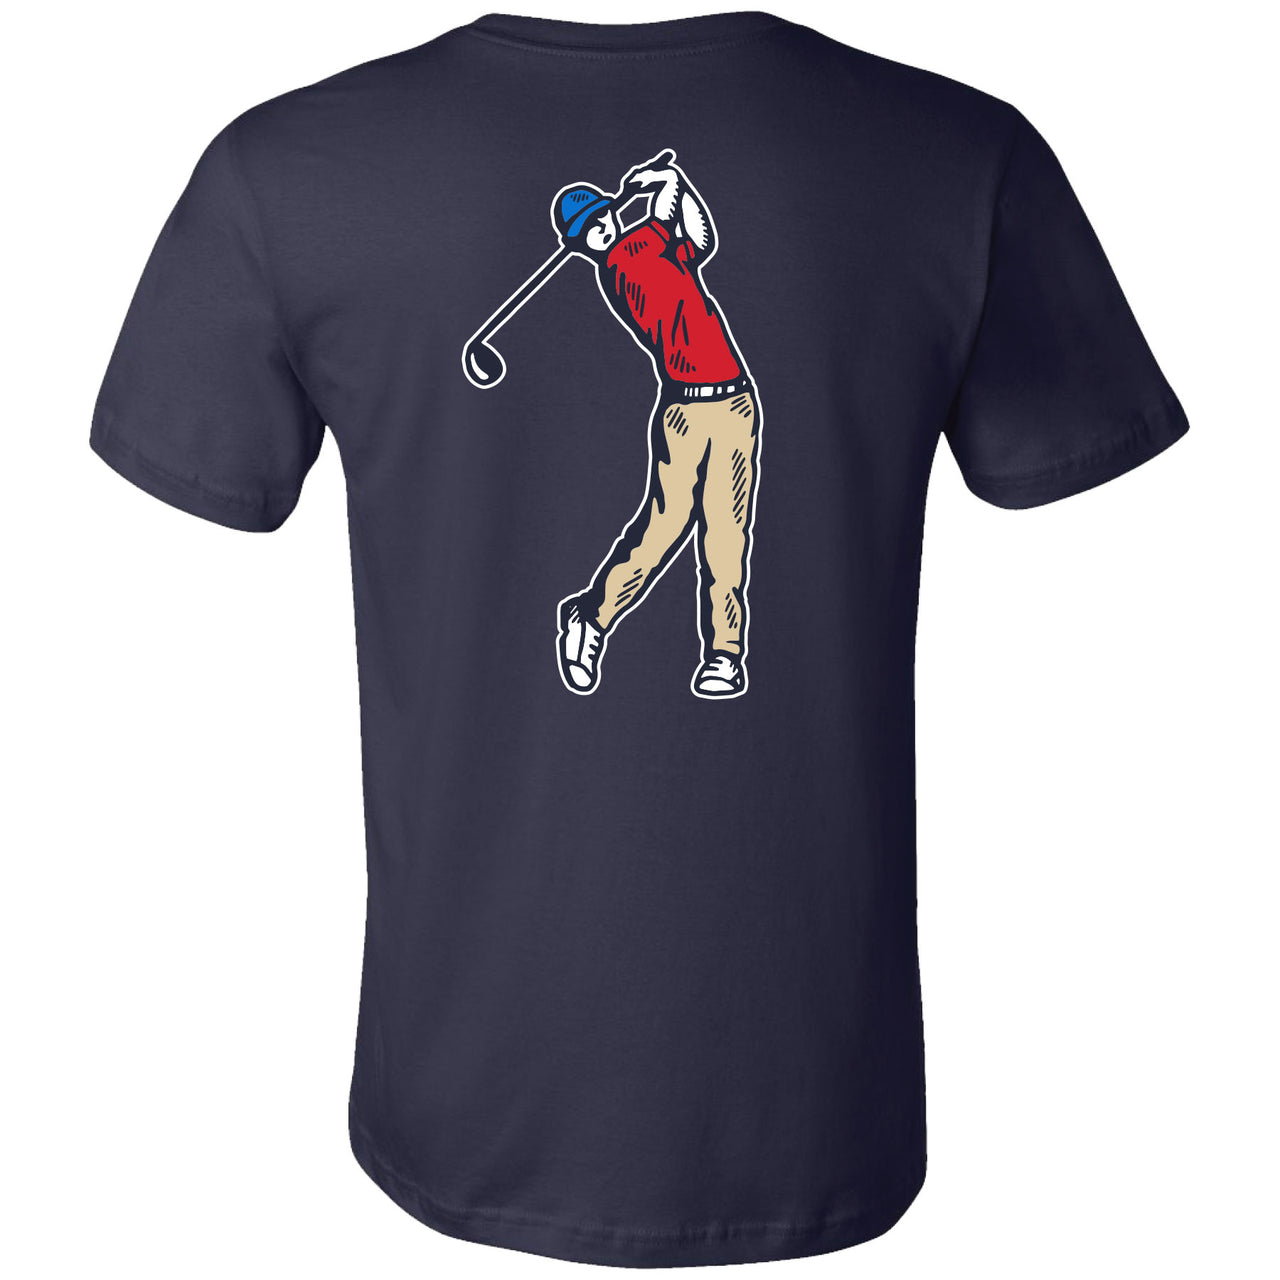 Michelob Ultra - Golf Outing 2-sided T-shirt